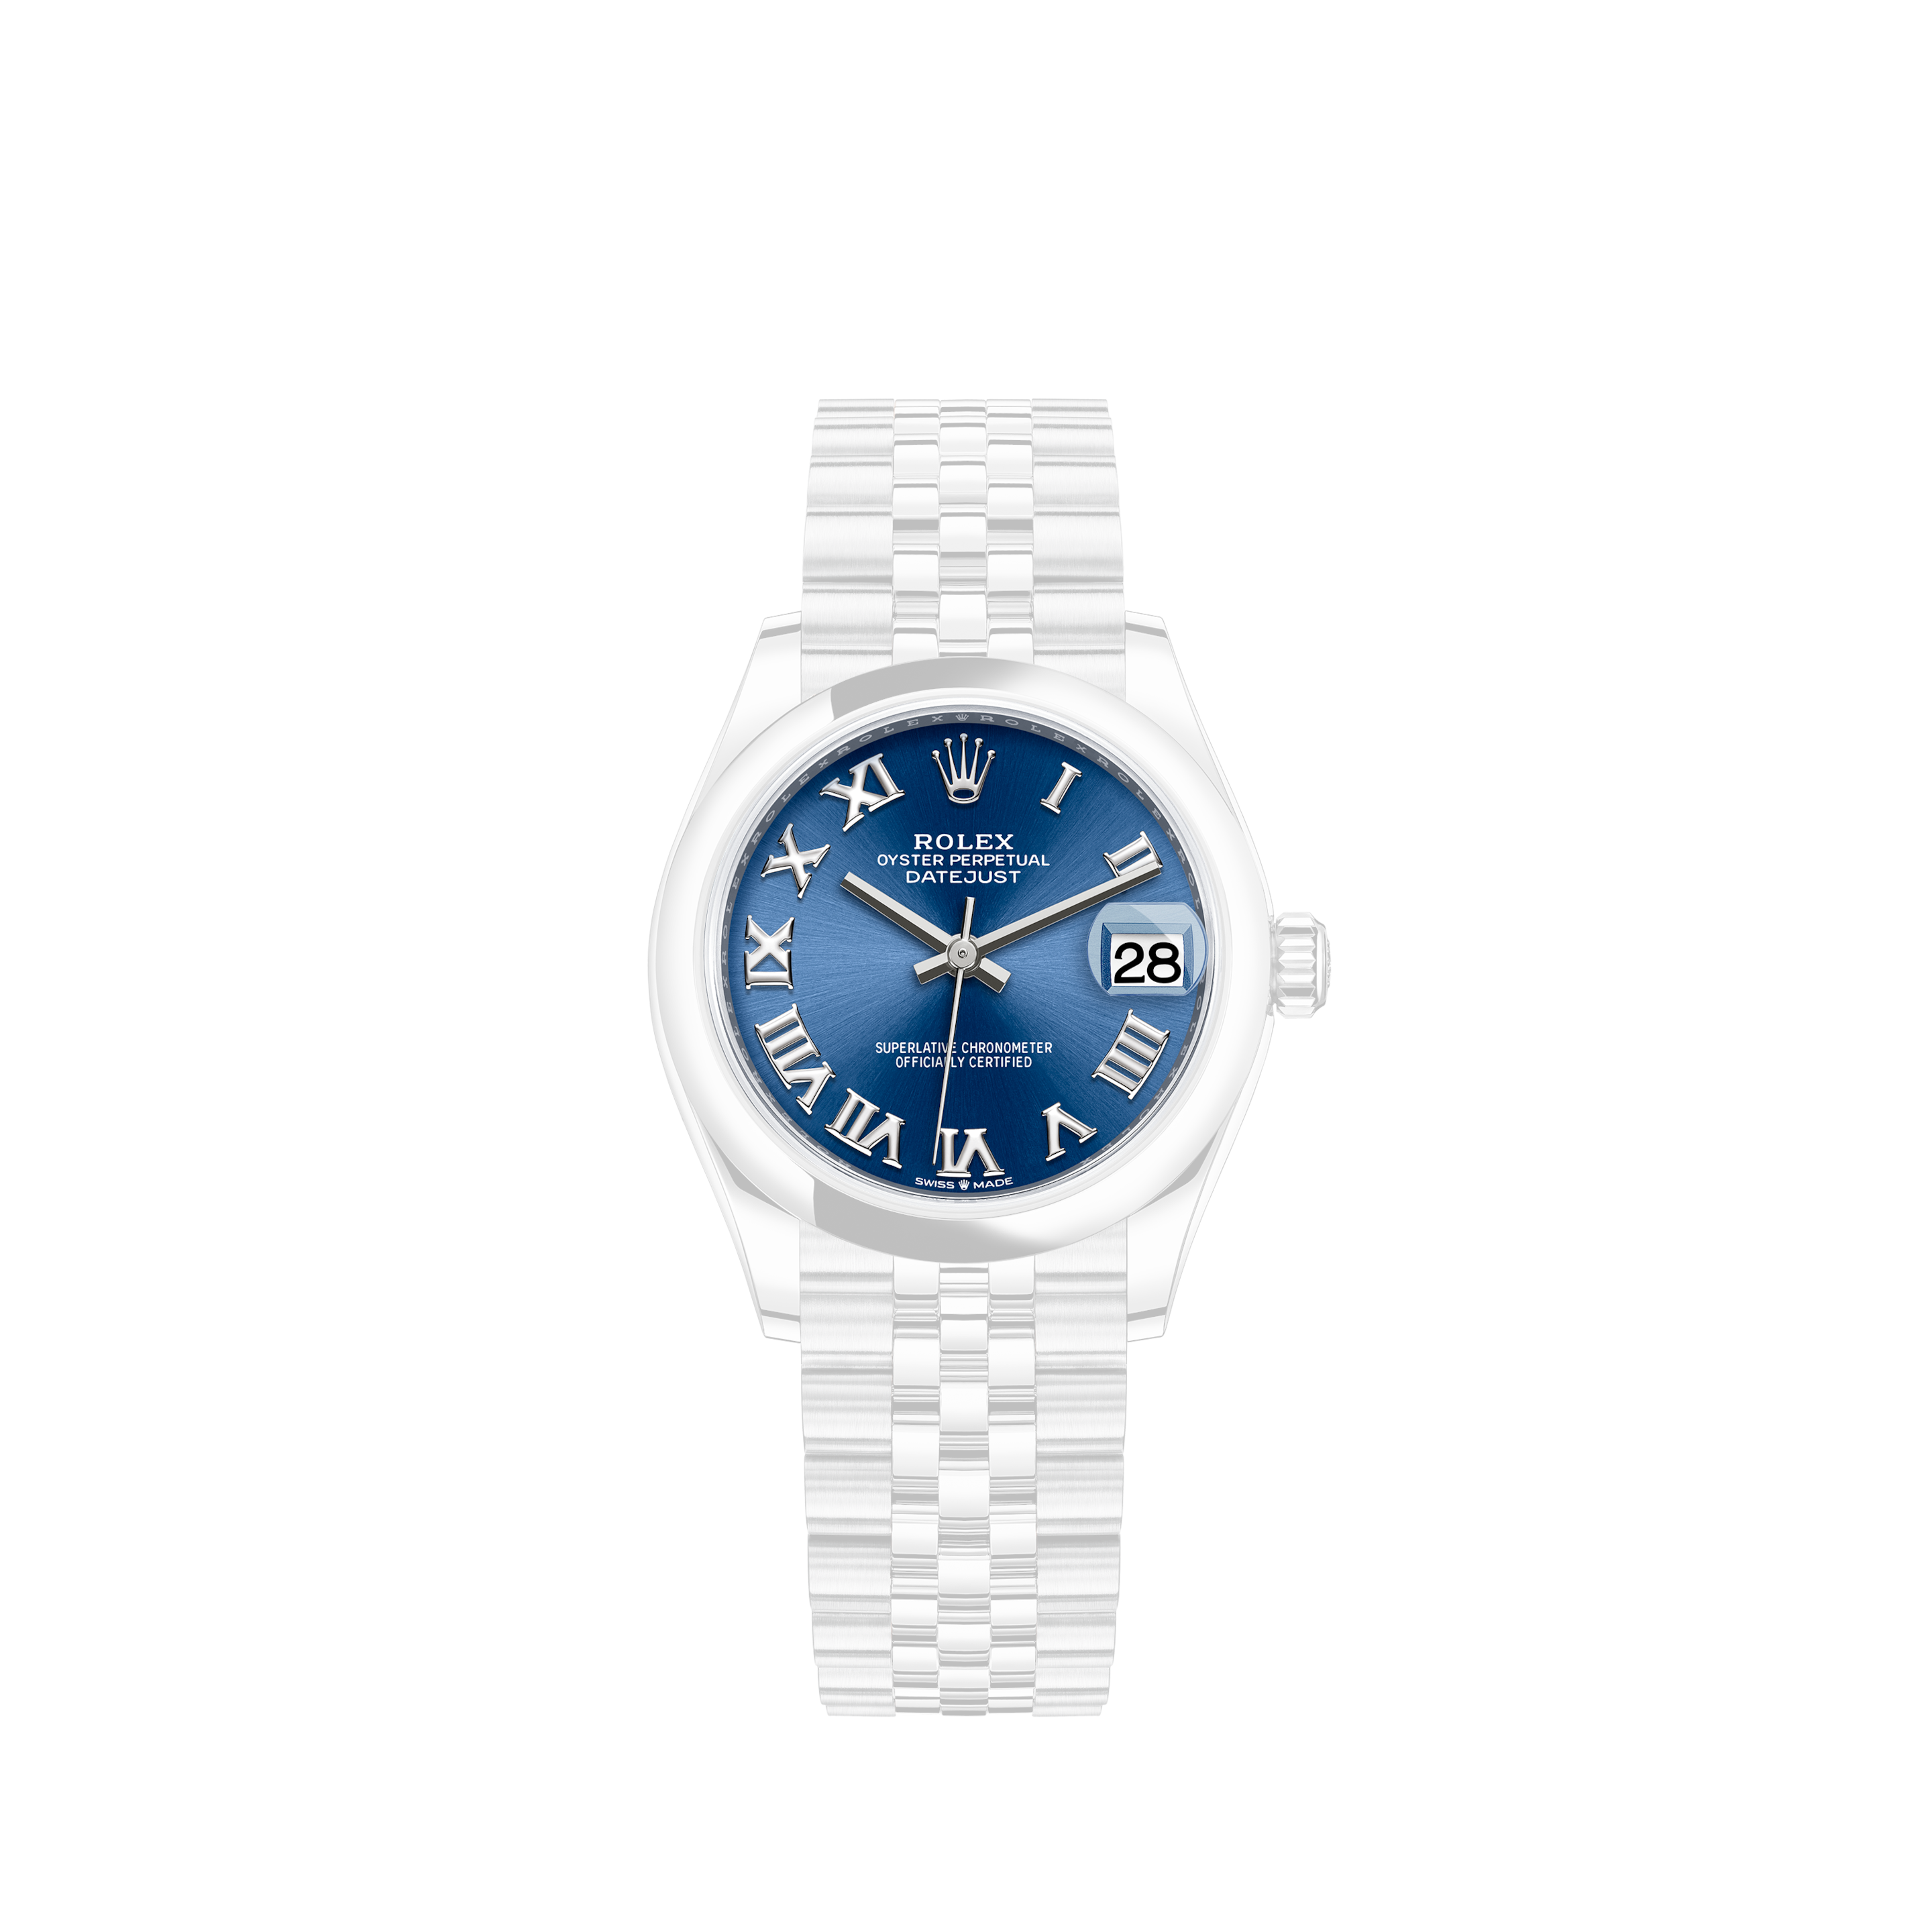 Rolex Lady-Datejust 179160, Roman Numerals, 2019, Very Good, Case material Steel, Bracelet material: Steel